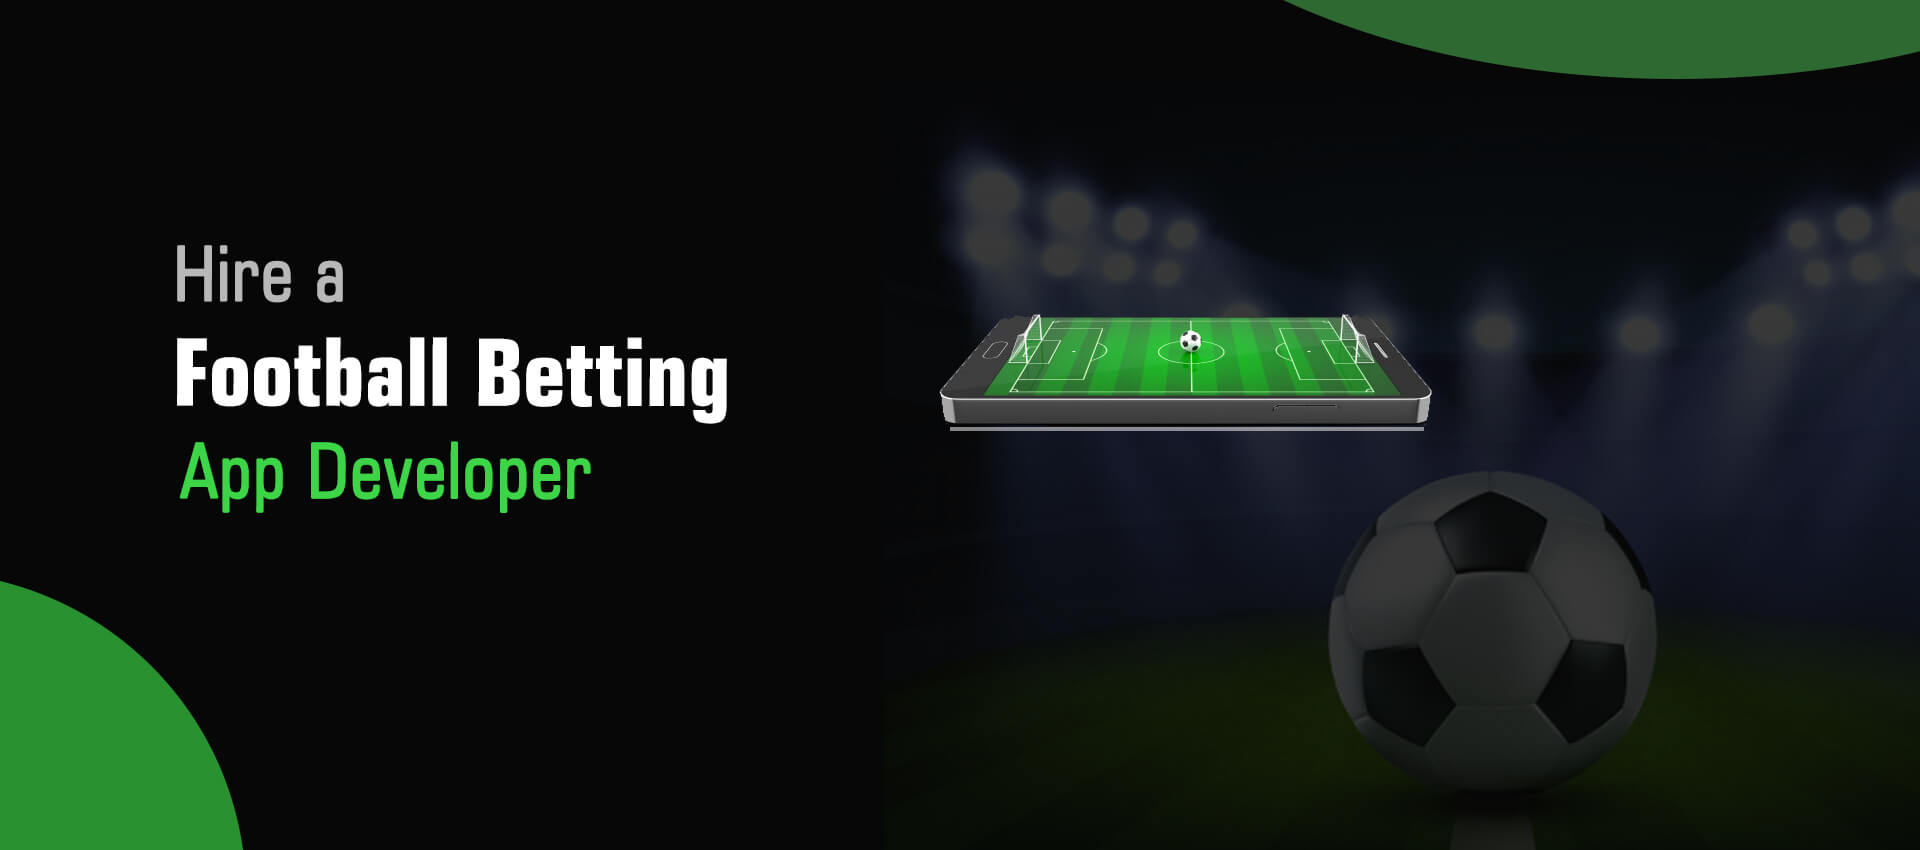 Things to Consider While Hiring a Football Betting App Developer